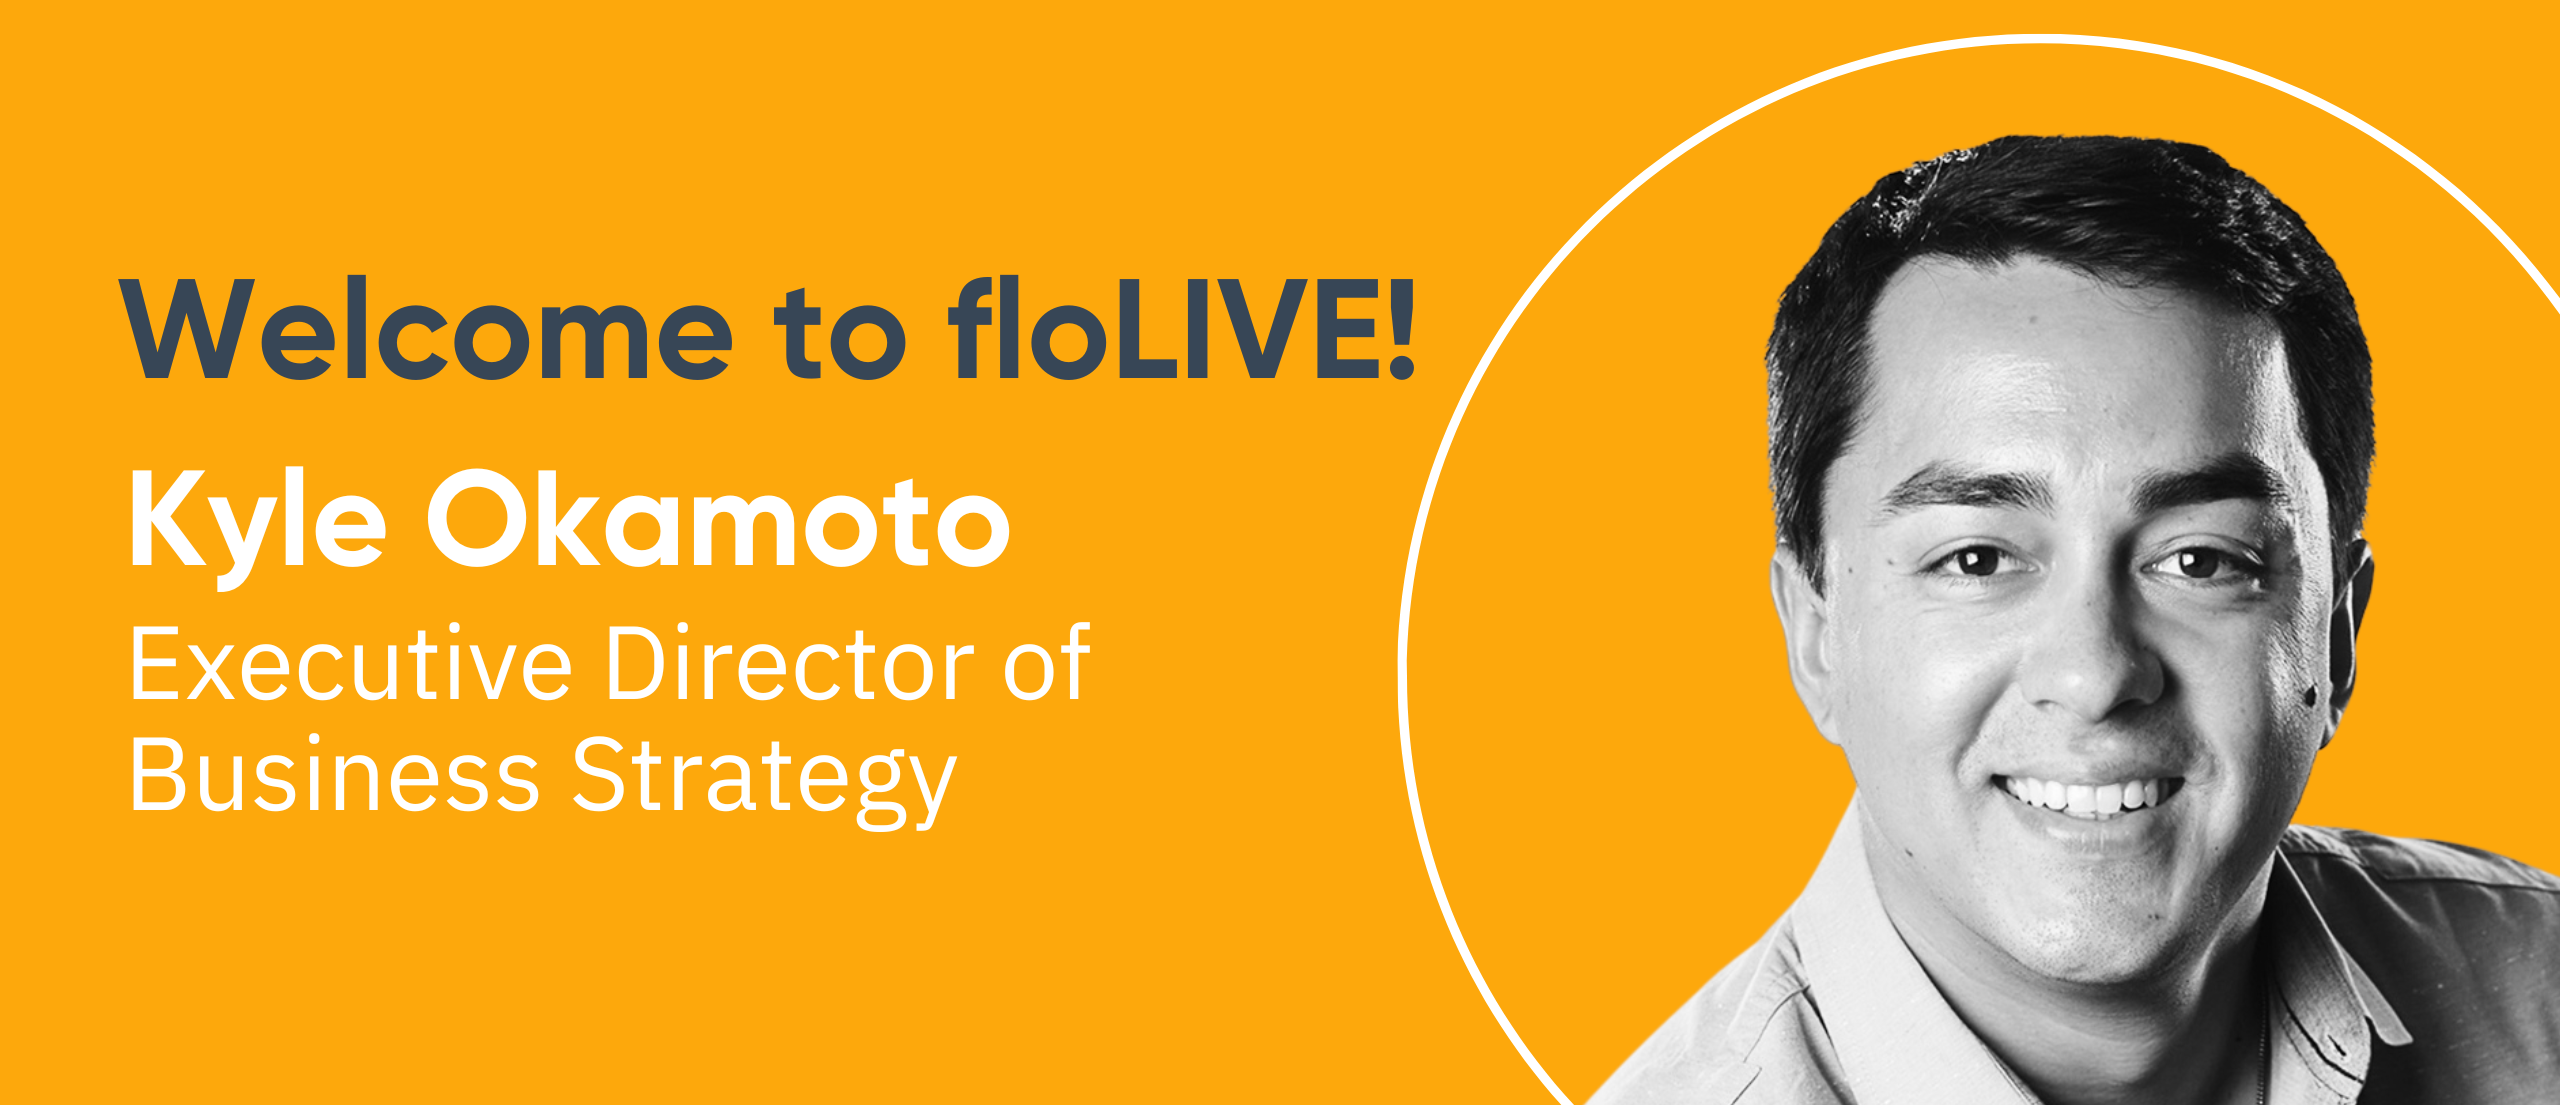 Kyle Okamoto Joins floLIVE’s board as Executive Director of Business Strategy to Drive Strategic Expansion of Global Cellular Infrastructure